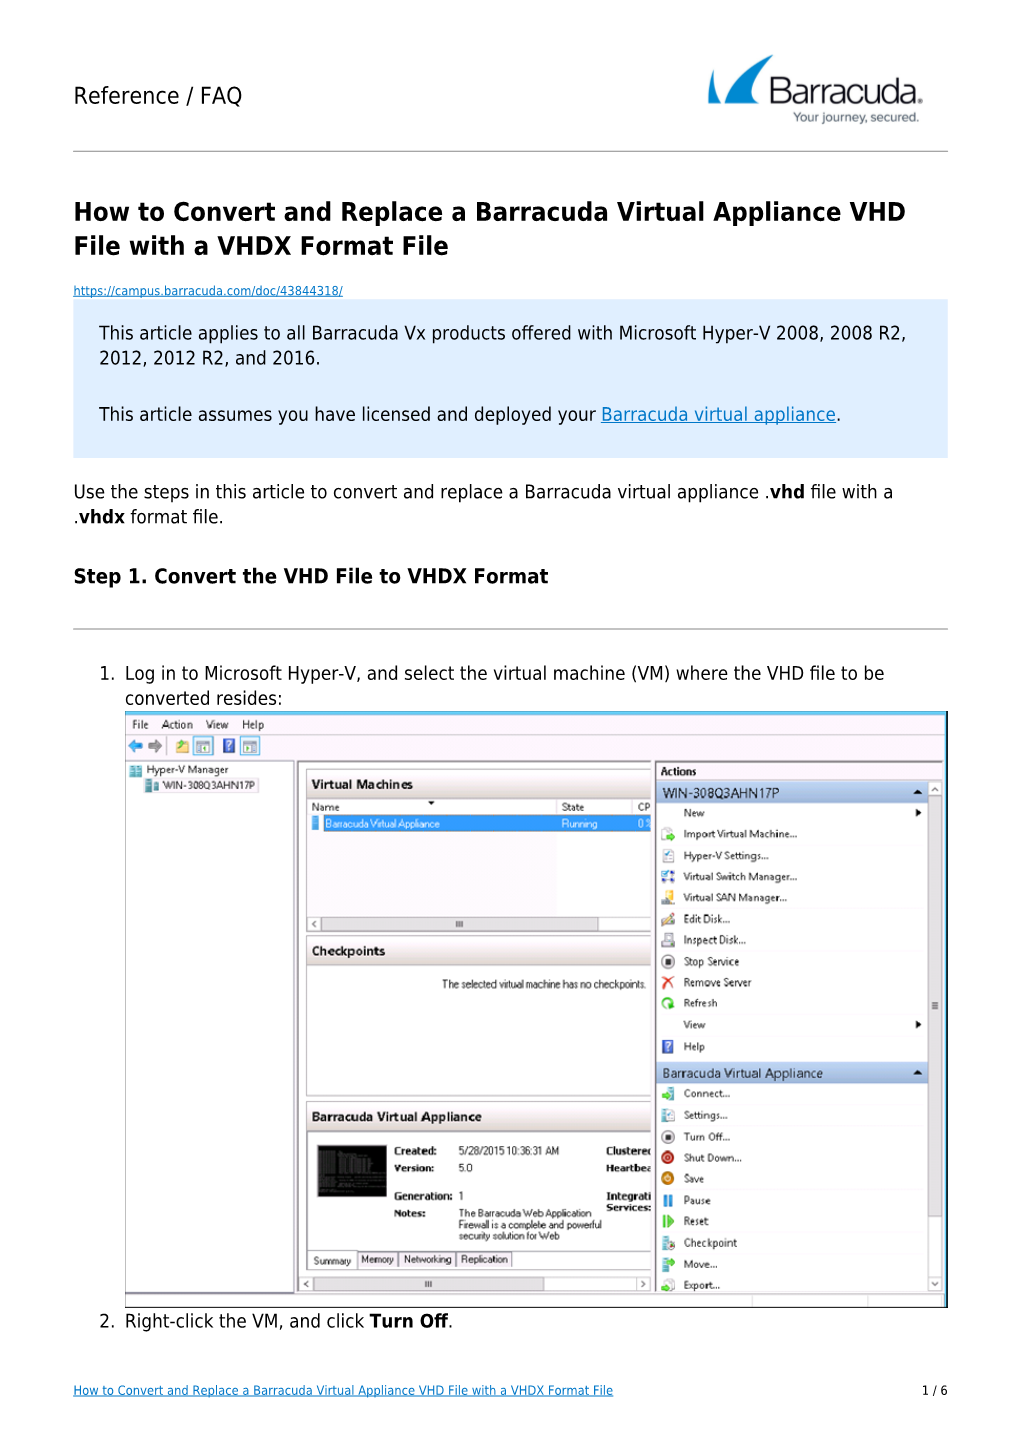 How to Convert and Replace a Barracuda Virtual Appliance VHD File with a VHDX Format File